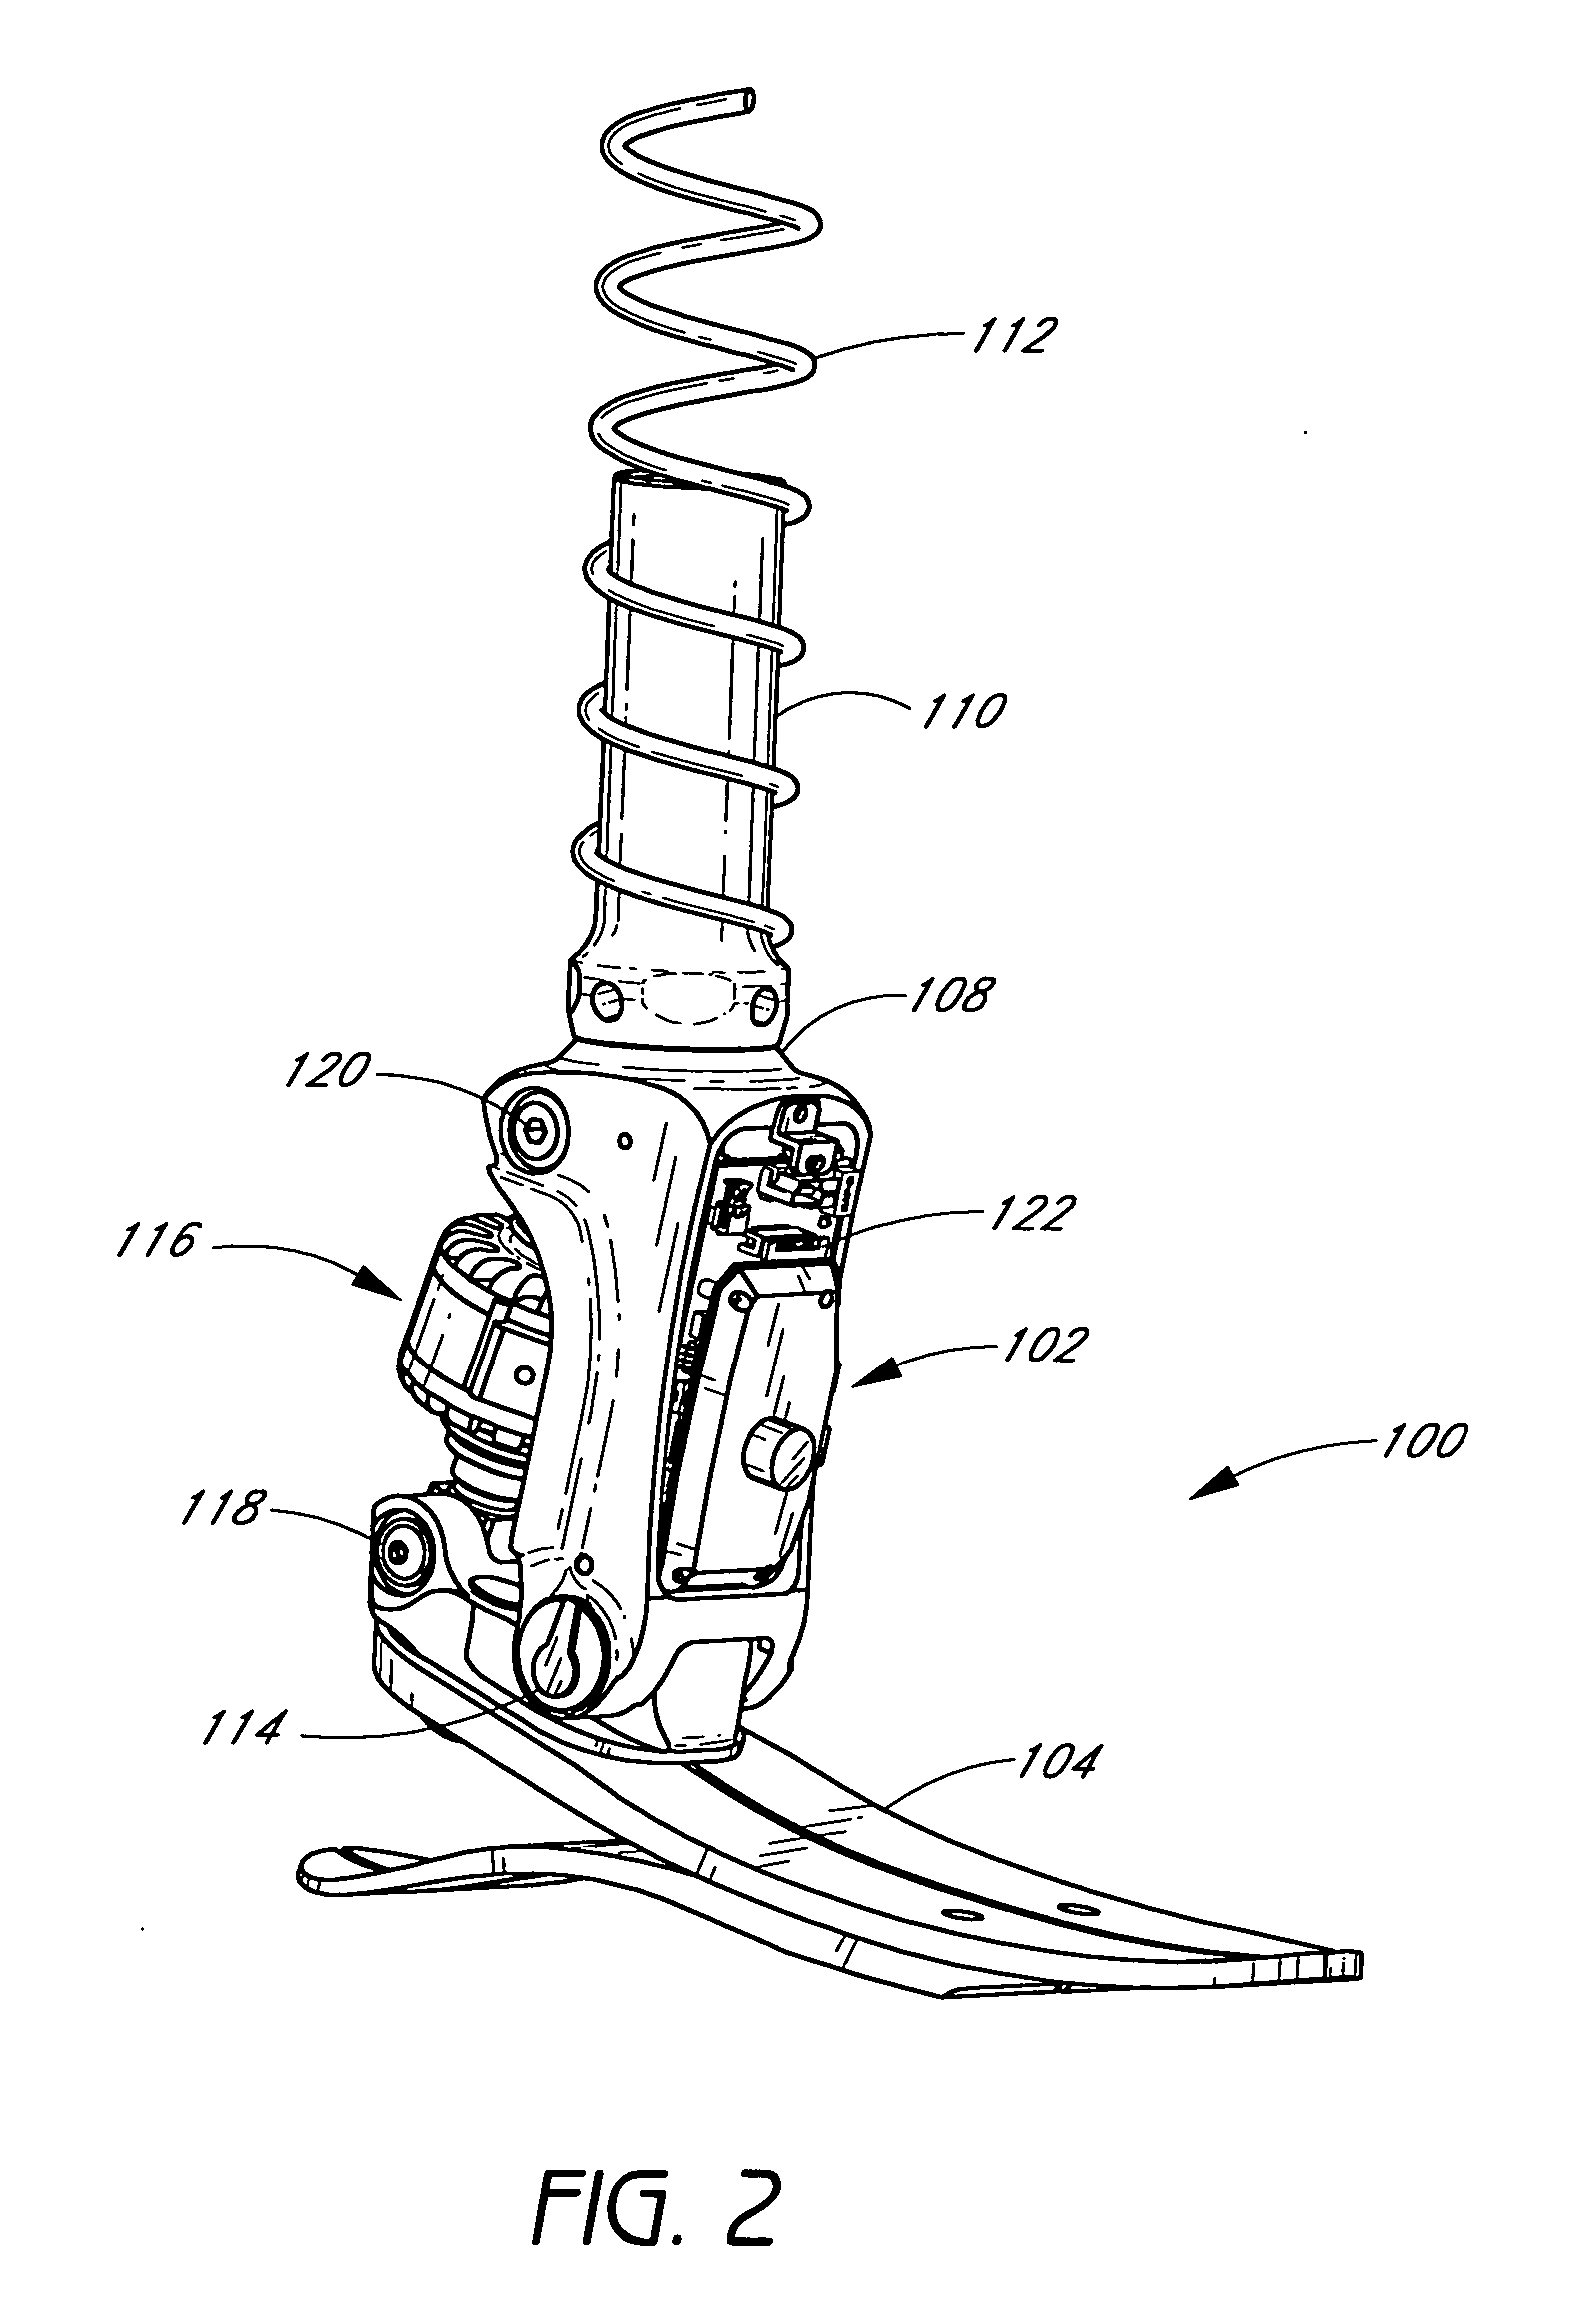 Systems and methods for adjusting the angle of a prosthetic ankle based on a measured surface angle